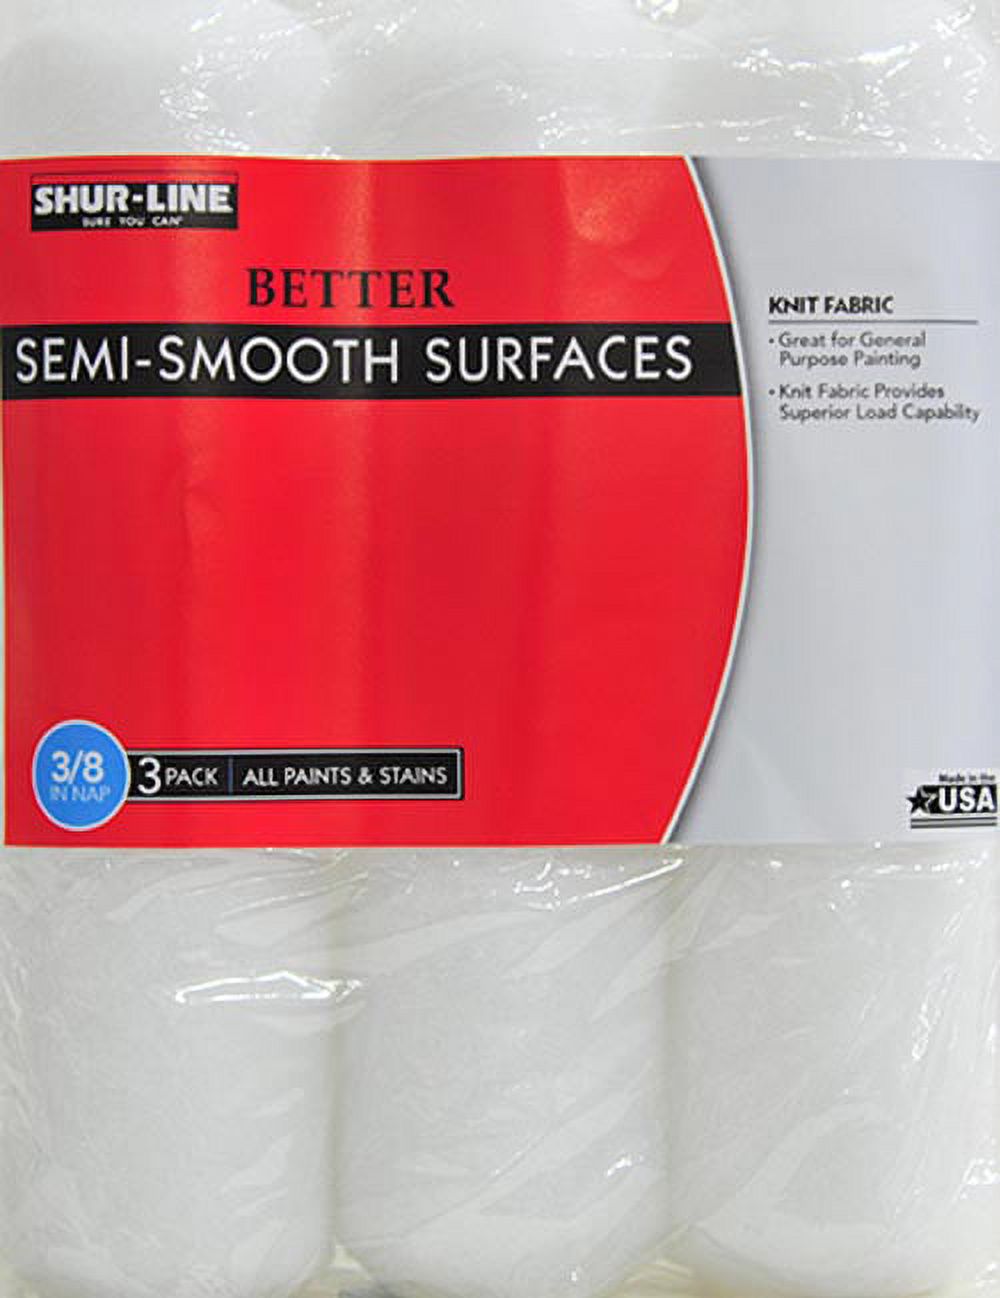 Shur-Line Semi-Smooth Knit 3/8" Roller Covers, 3pk - image 3 of 3